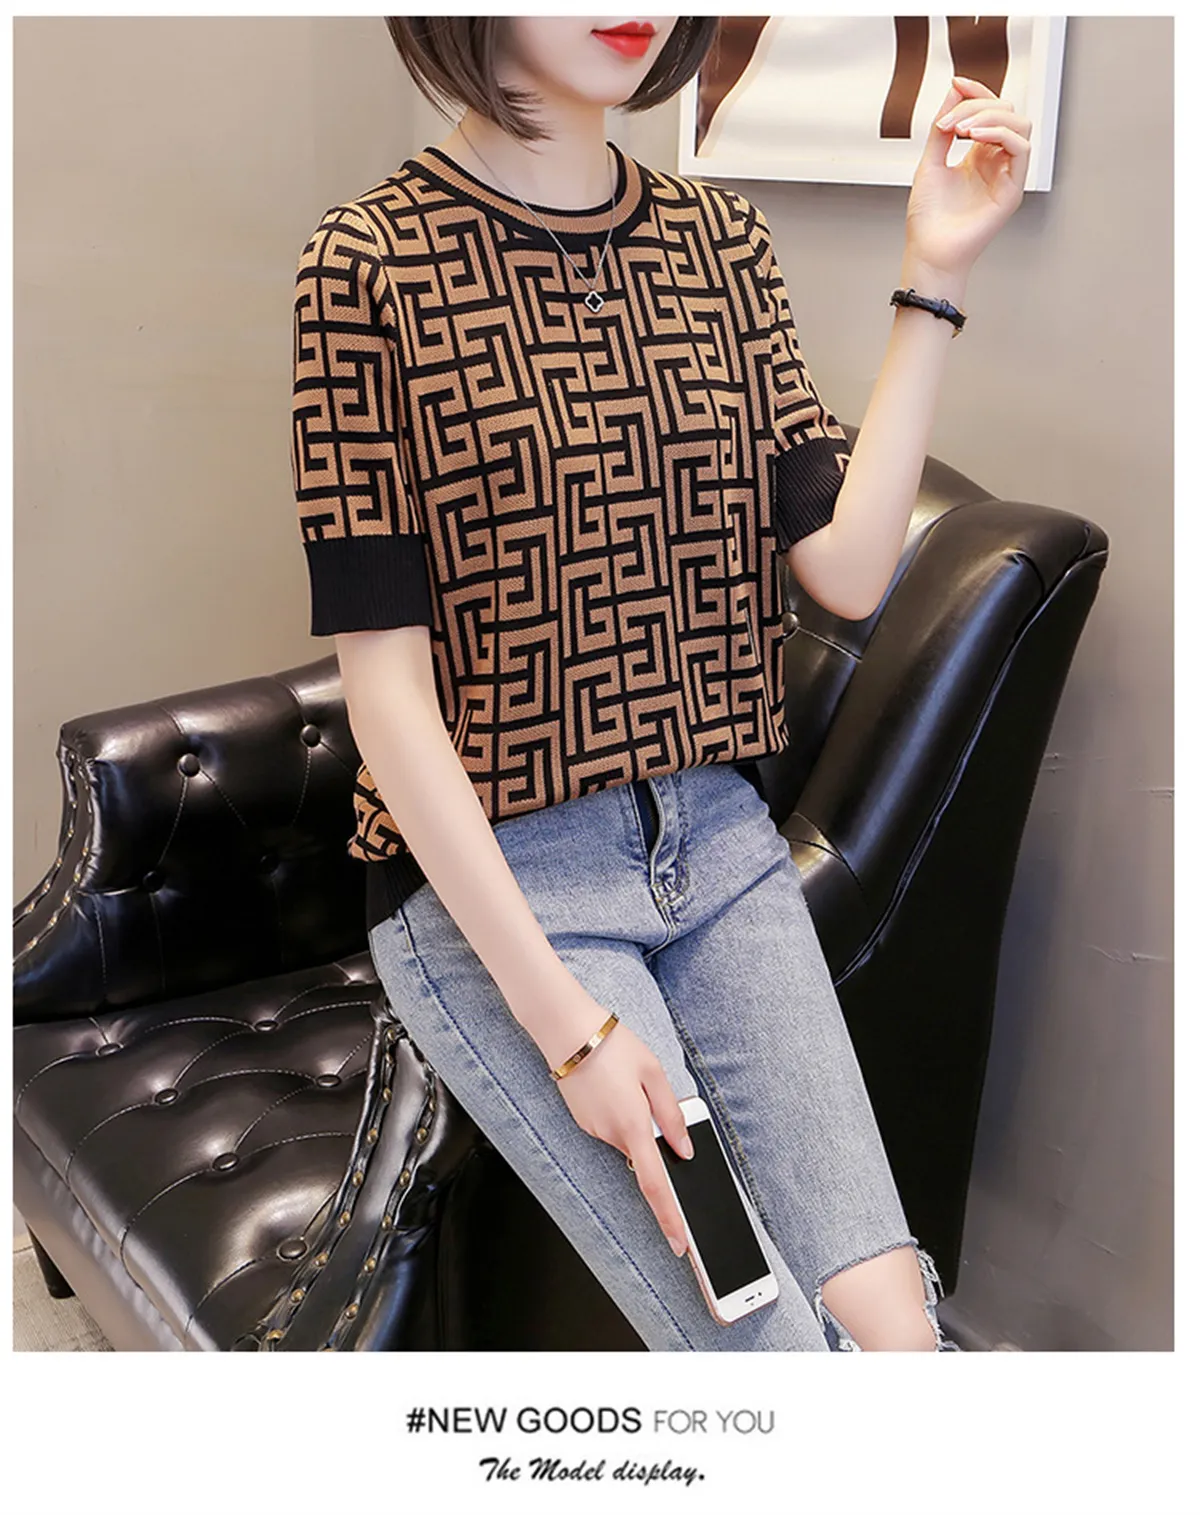 Women's T-Shirt Women Sweaters Loose Knitted Short Sleeve Cardigan Tops Patchwork Color V-neck Casual Tees For Ladies Casual Knitwear Homme Coats